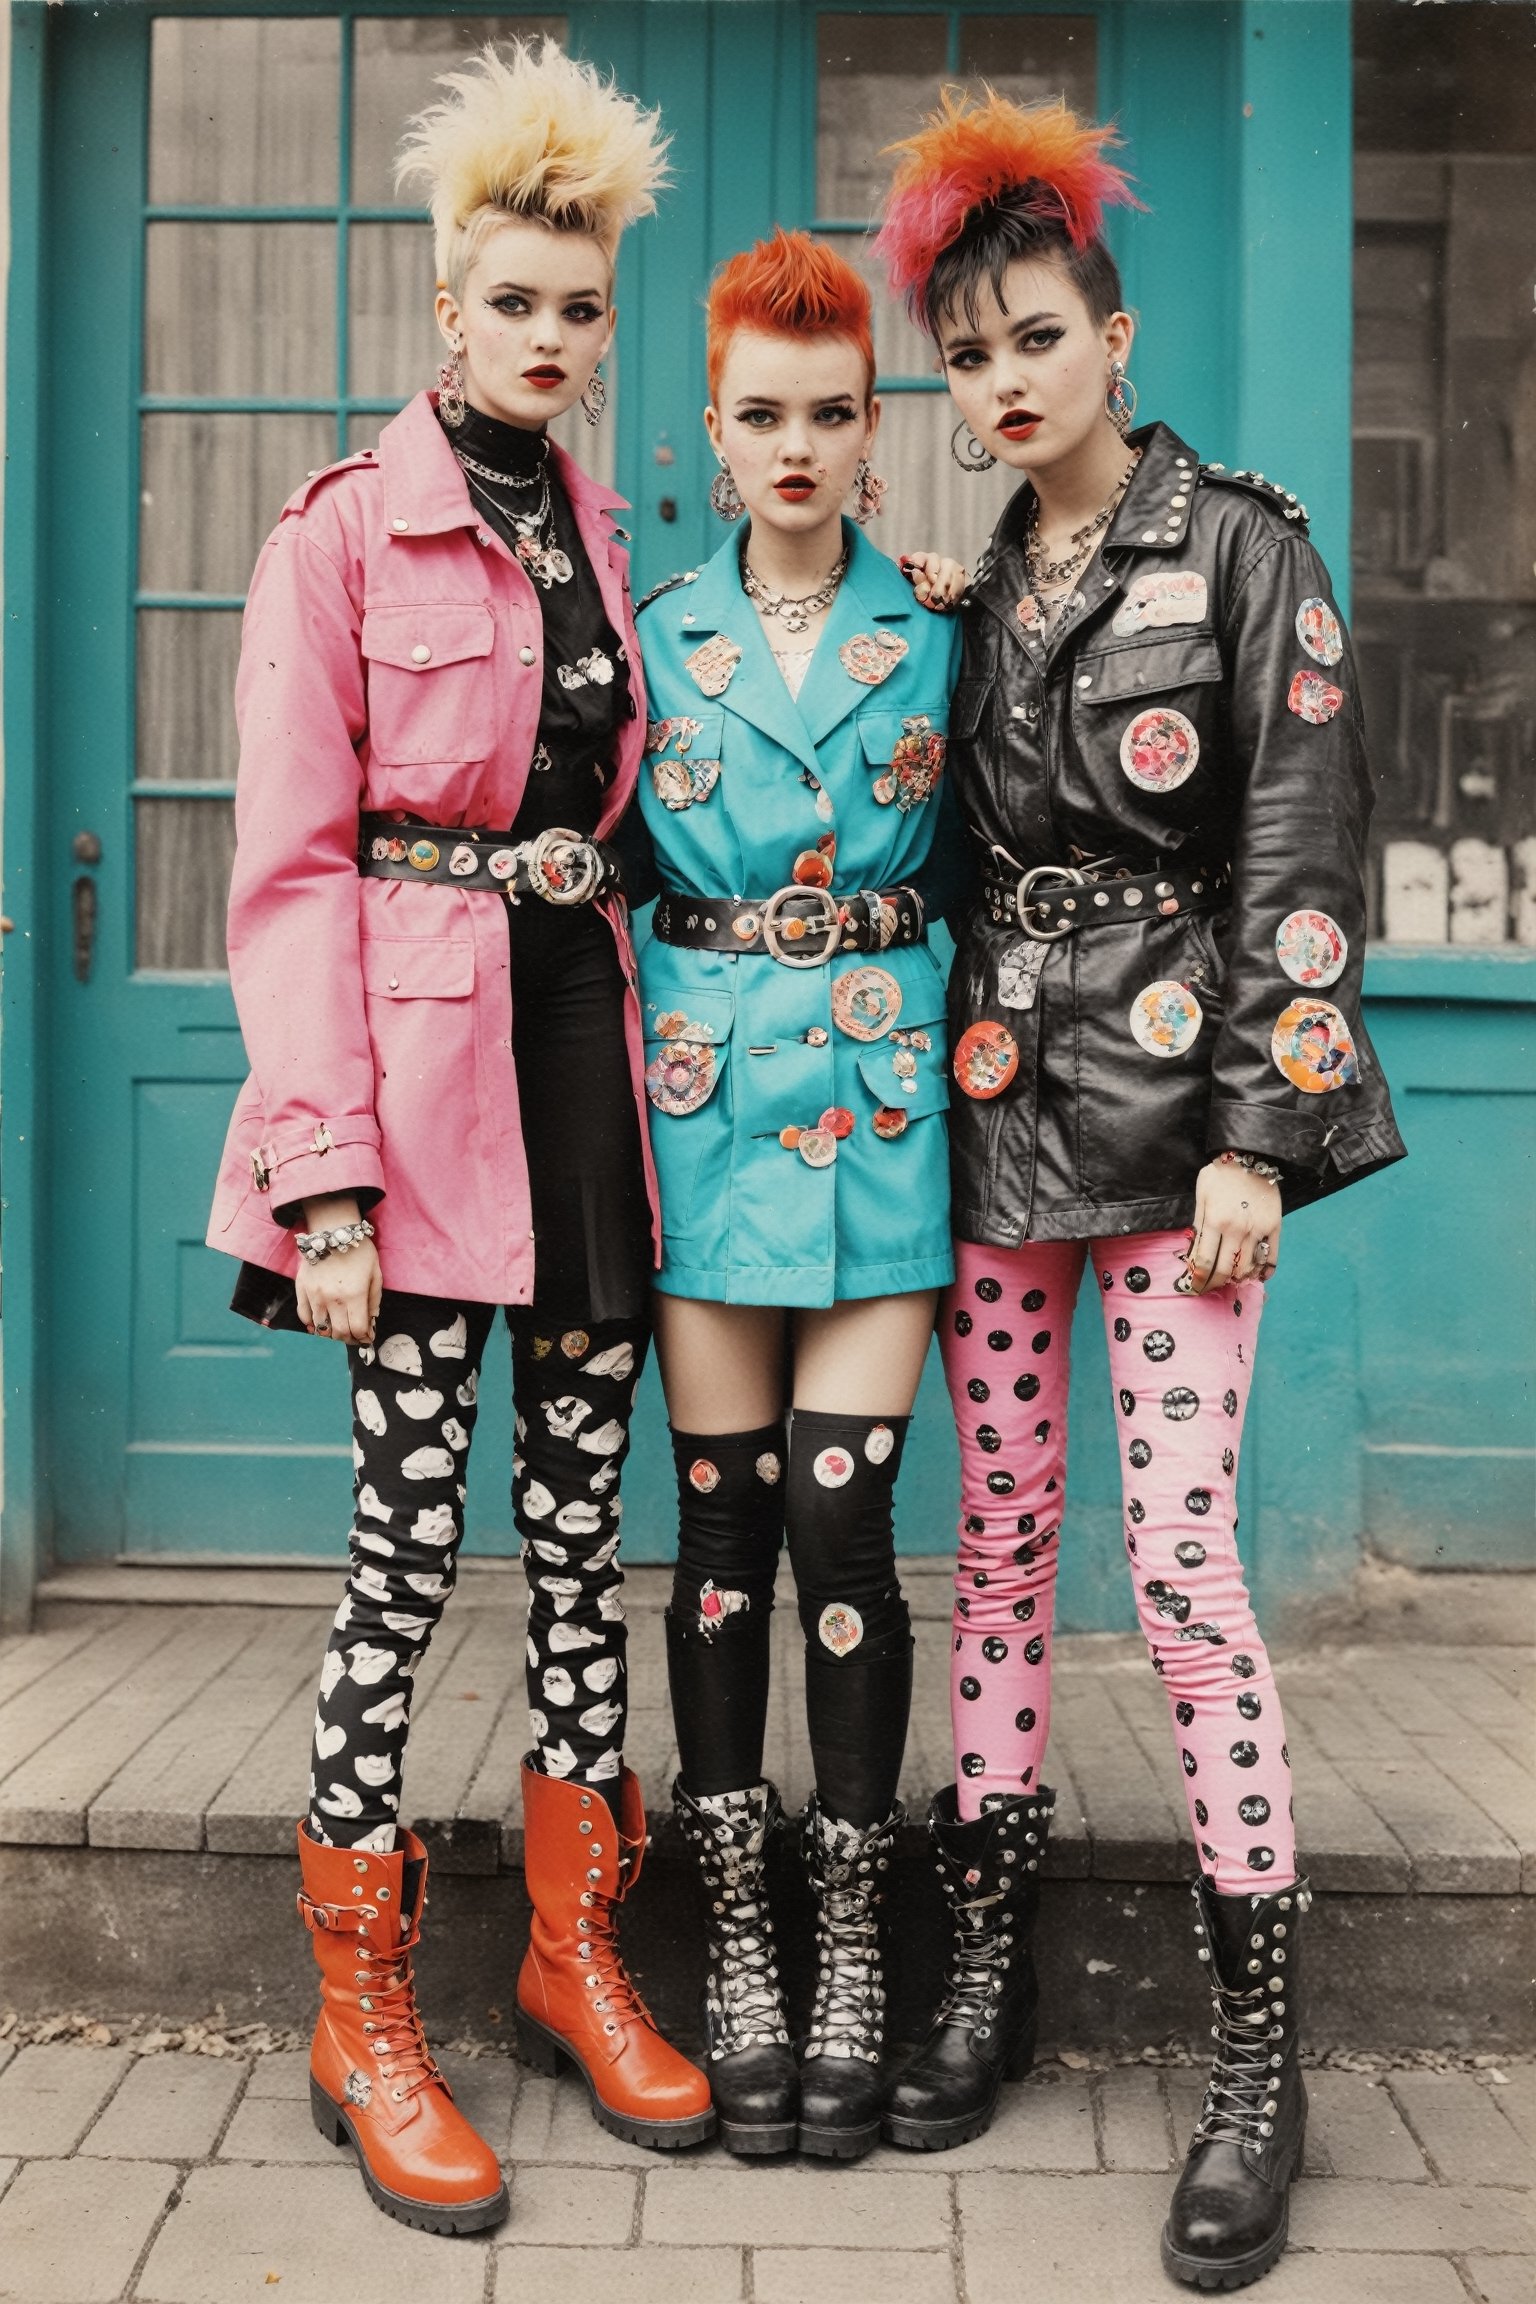 monochrome photo, vibrant and unconventional punk rock fashion, ensembles inspired by kitsch and maximalism, bold prints, clashing colors, oversized jackets decorated with whimsical patches, bright colors Unique accessories such as leggings, thick belts and decorative boots, spike studs,cinematic style